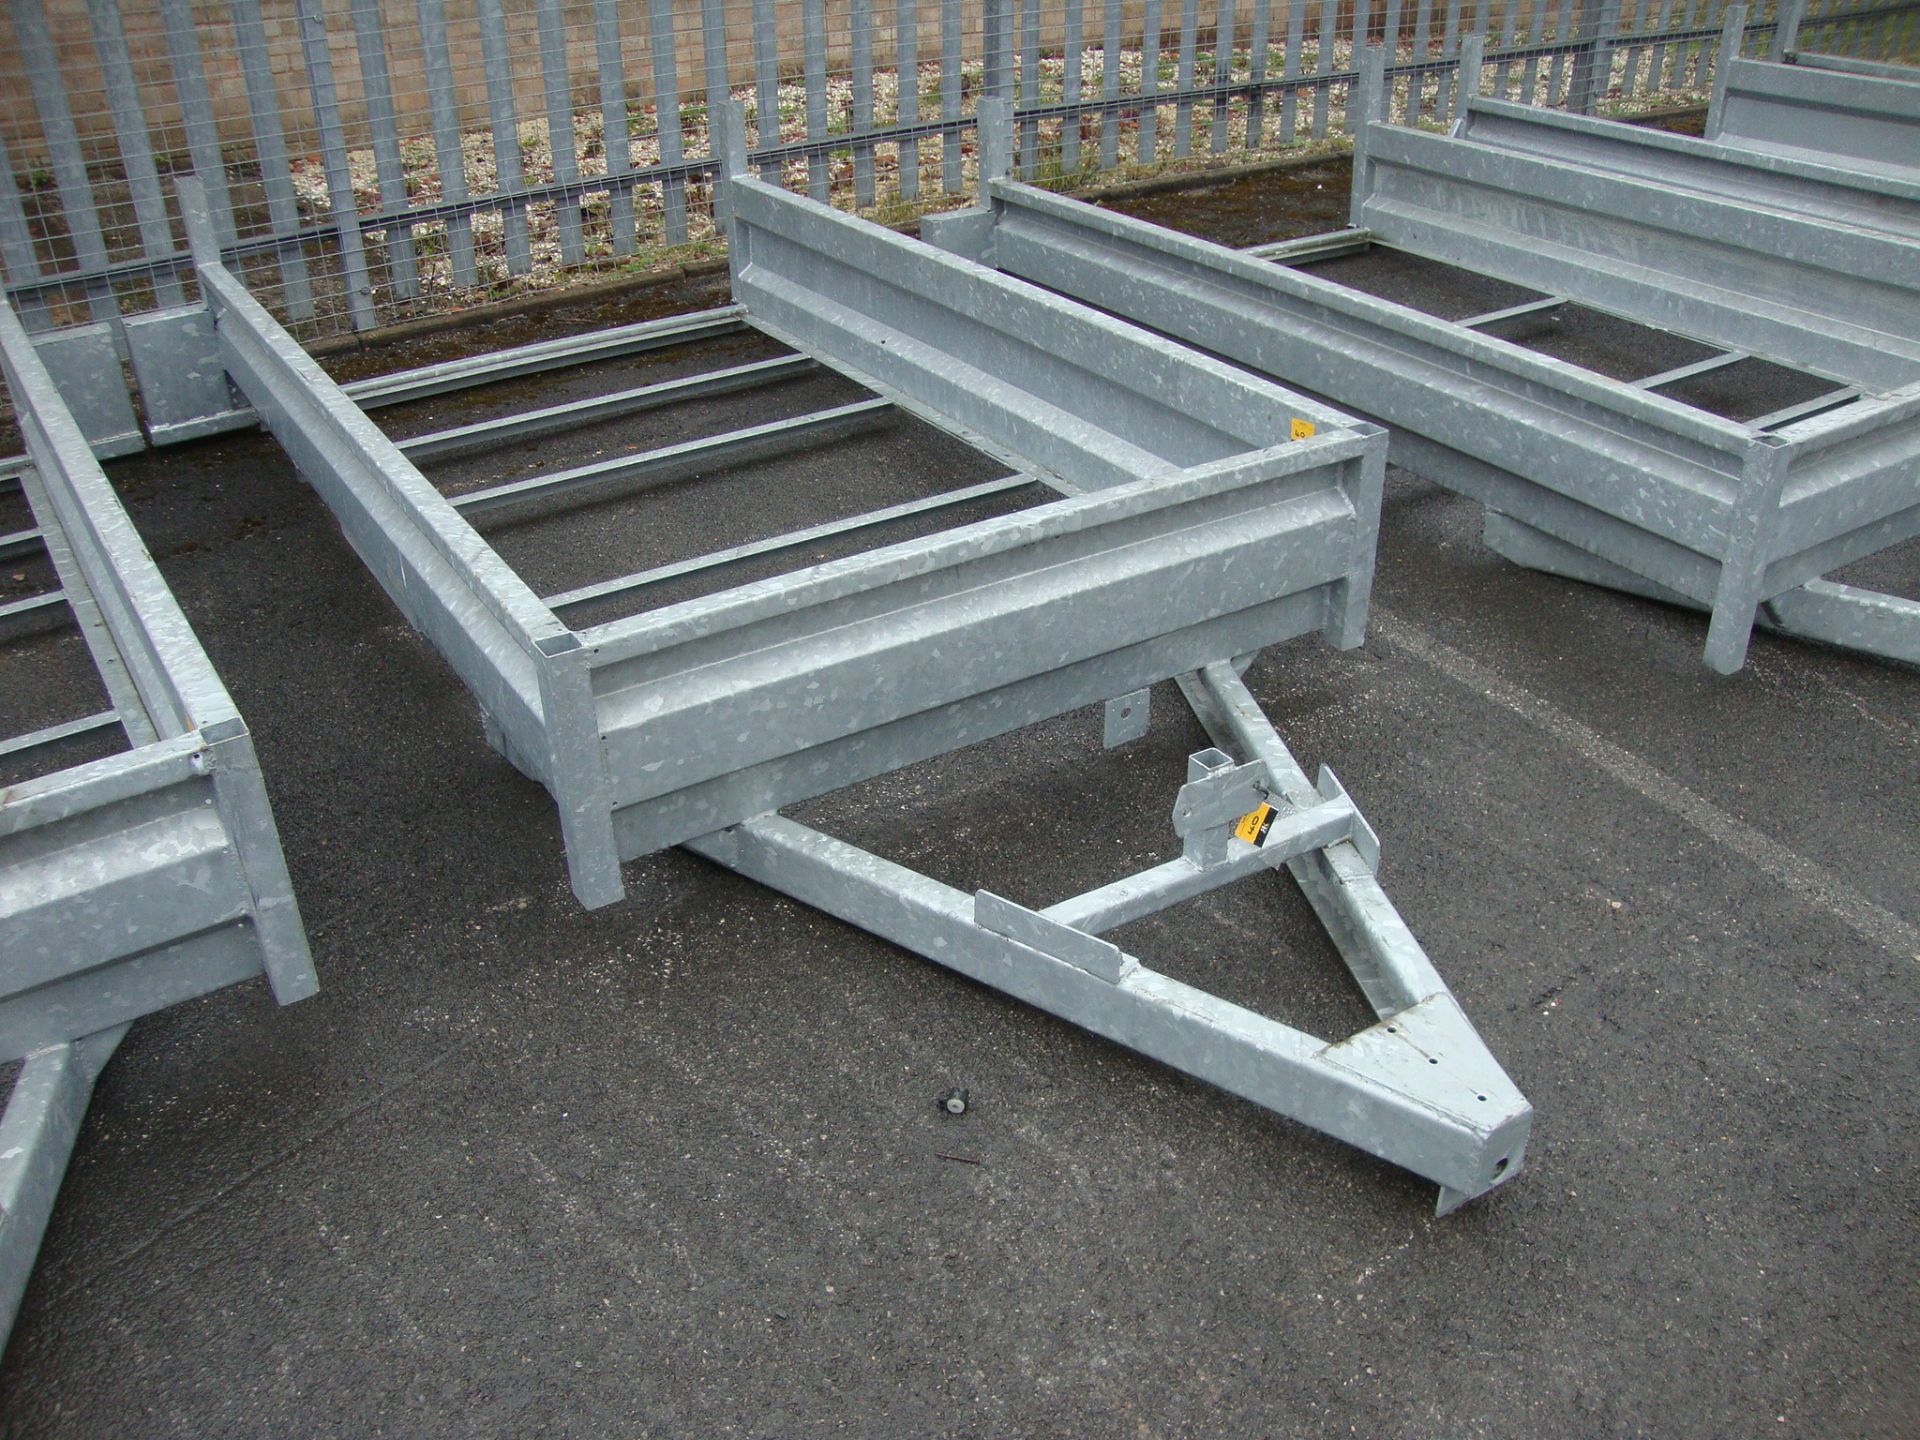 Trailer chassis/frame – galvanised, bed size 213cm (l) x 121cm (w), excluding the A-frame as